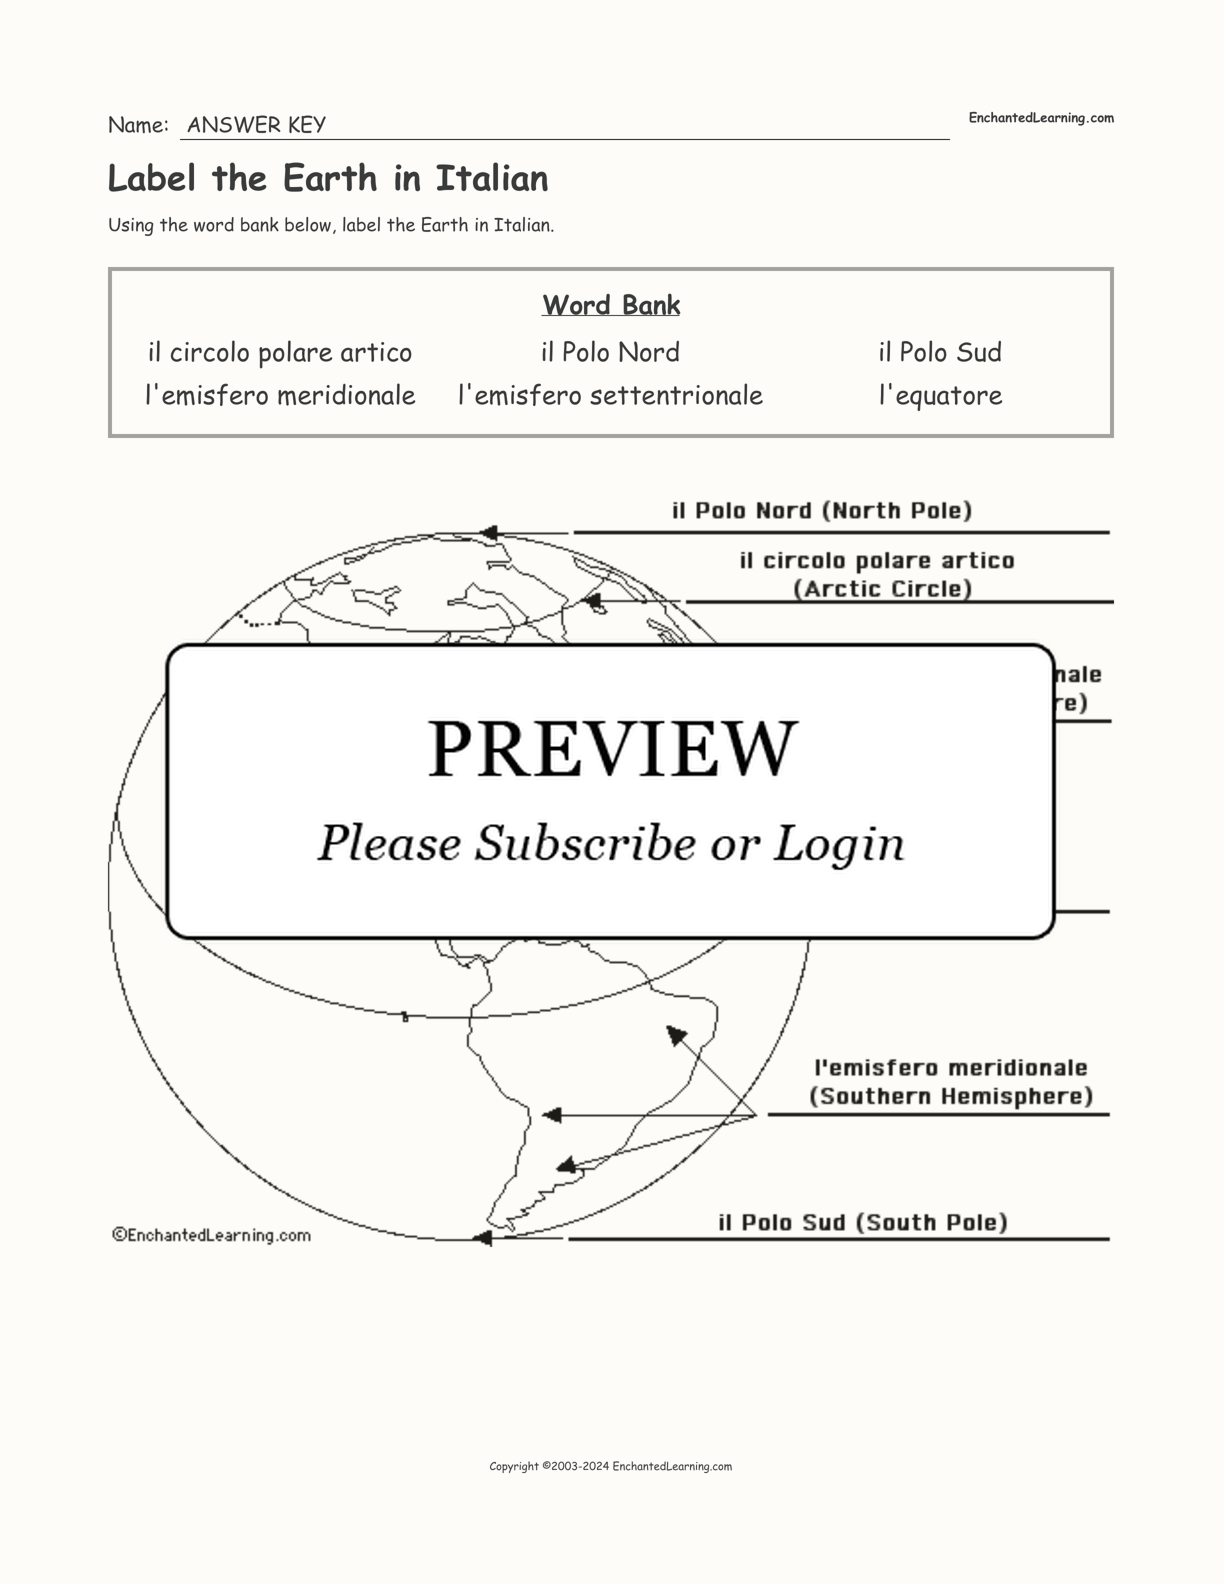 Label the Earth in Italian interactive worksheet page 2